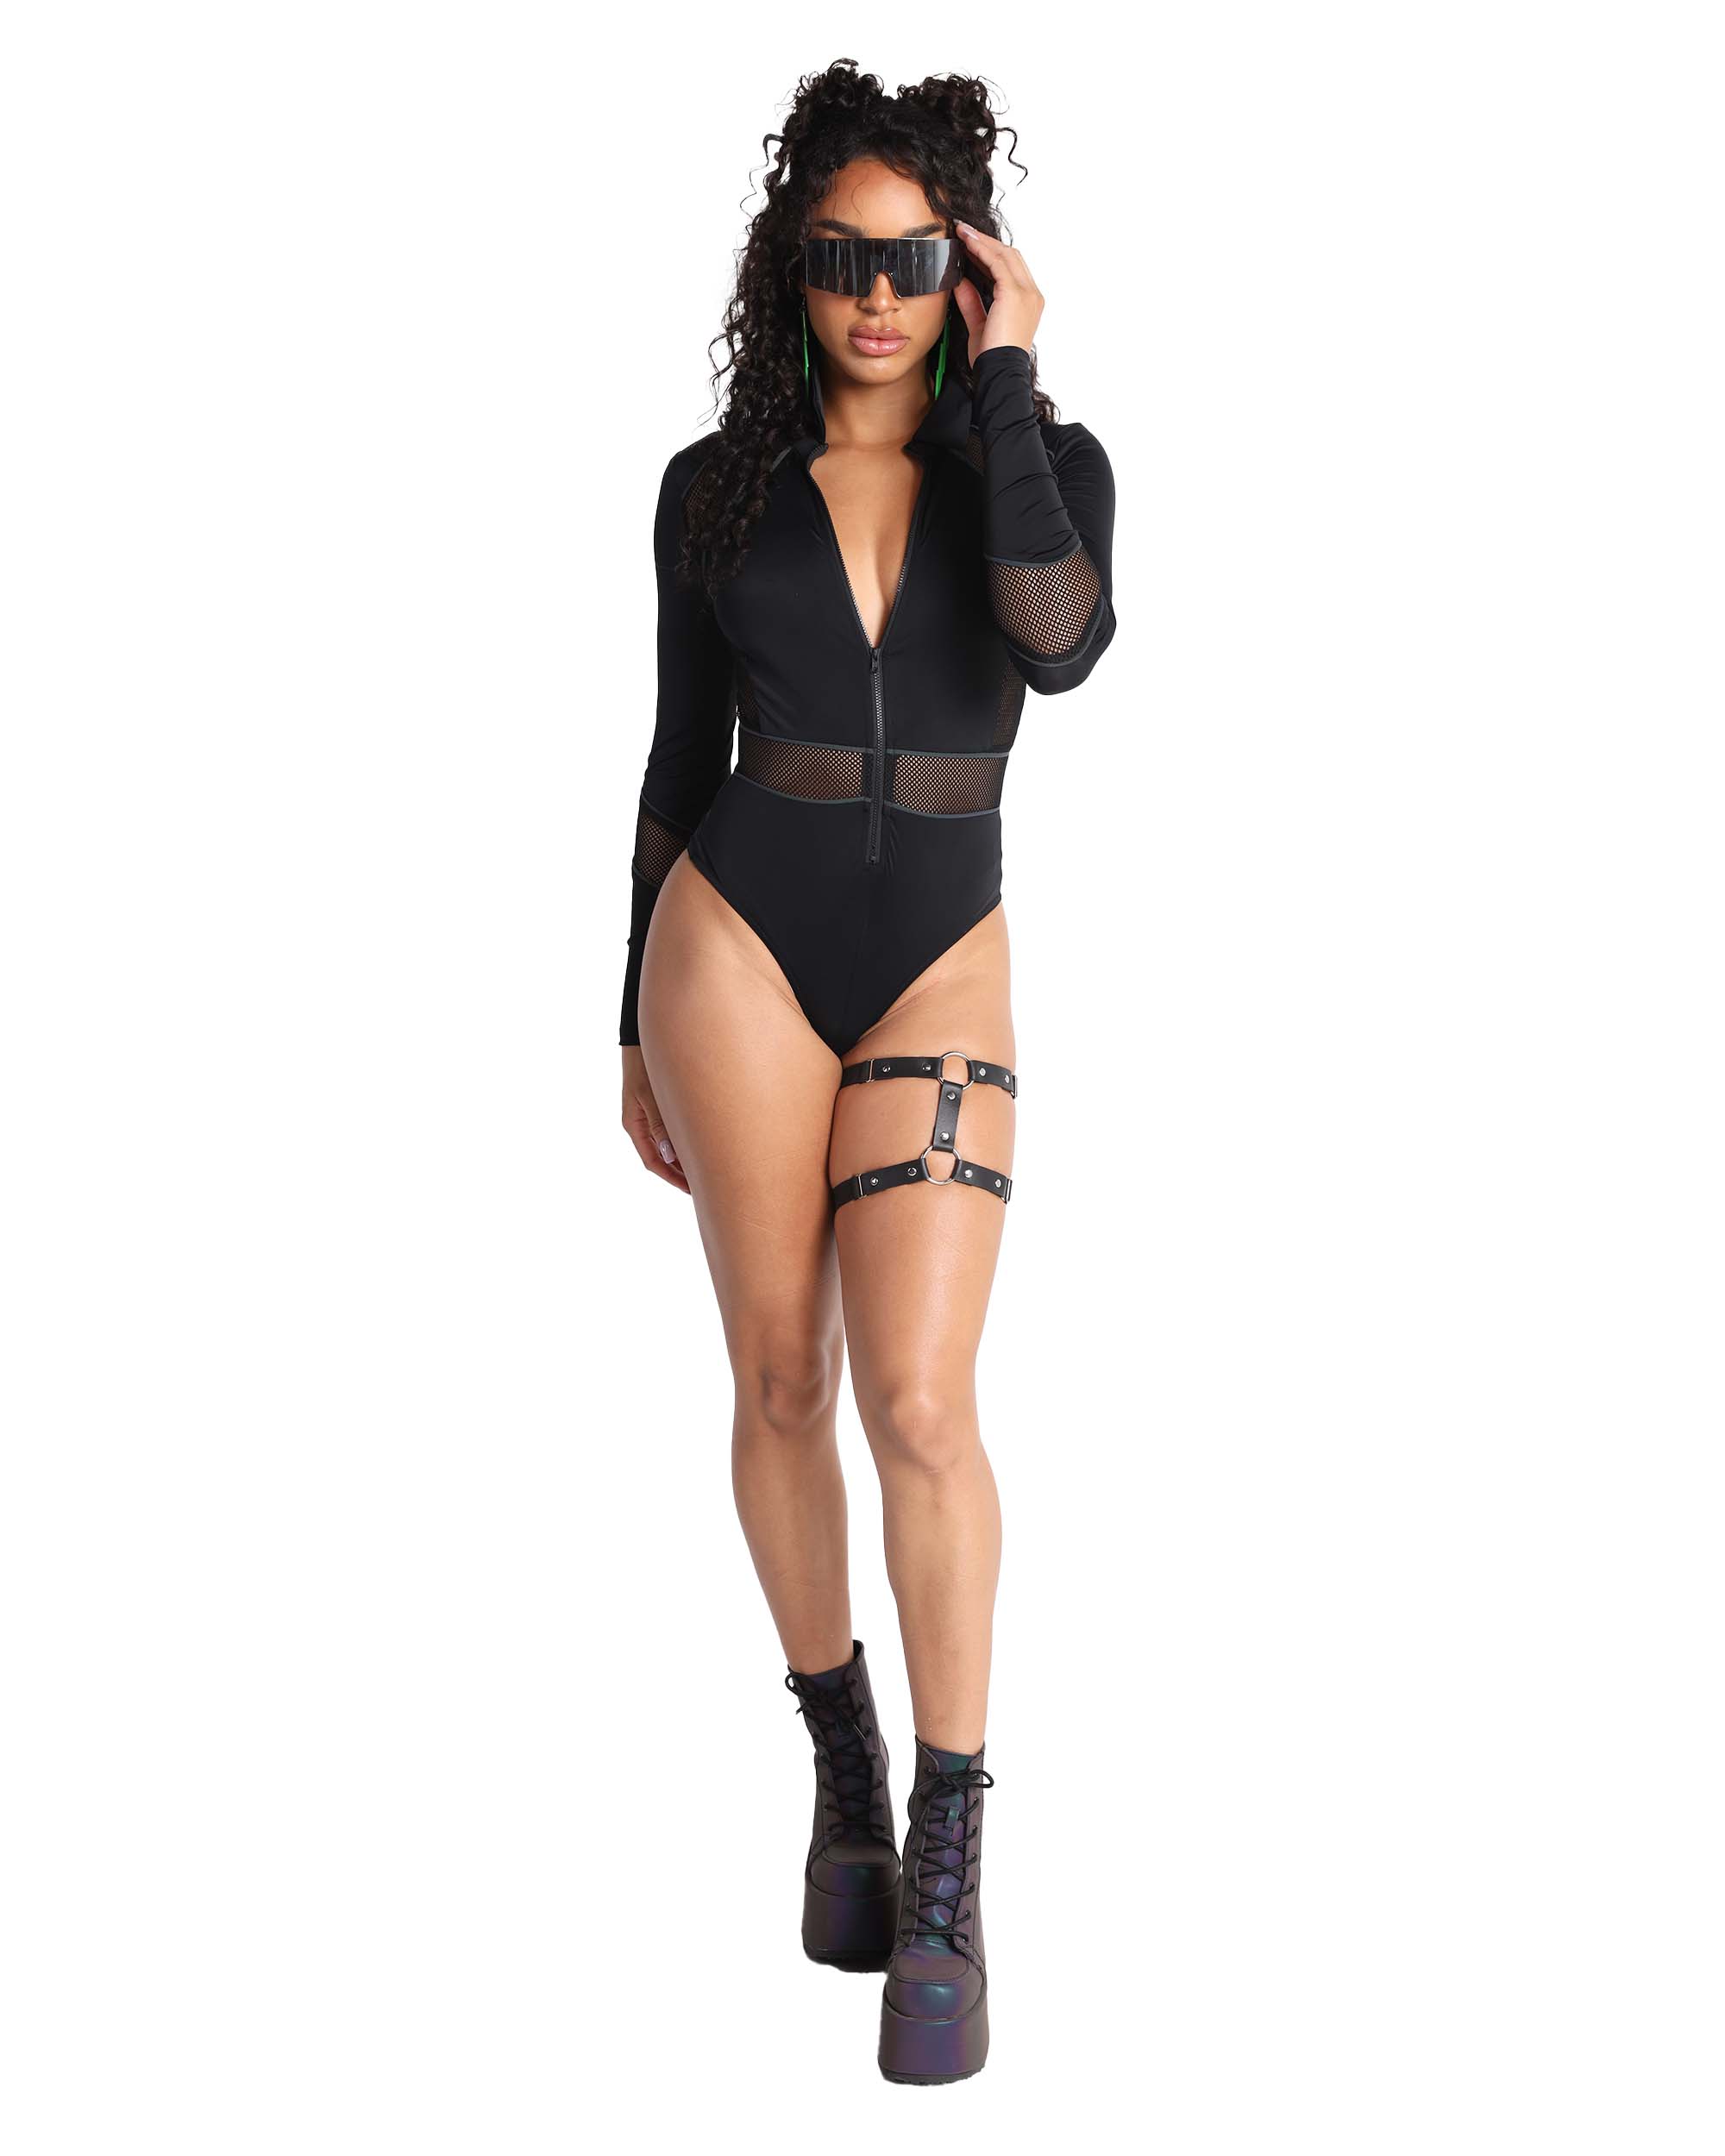 Rainbow Reflective Flame Nude Mesh Bodysuit for Raves, Festivals, Parties,  Dancing and With Denim Shorts -  Canada